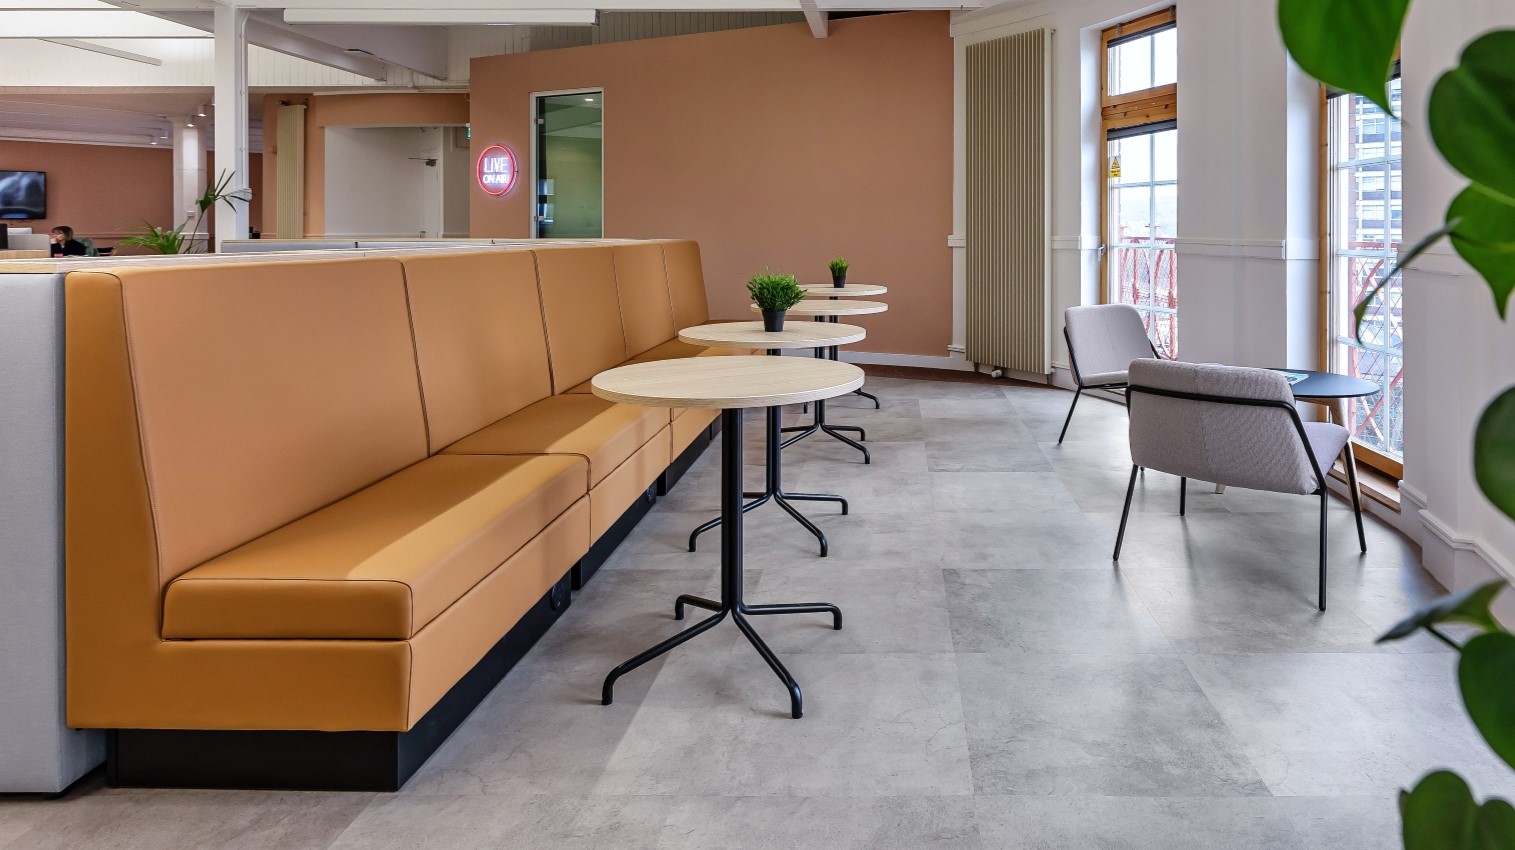 Banquette Seating With Tables And Chairs